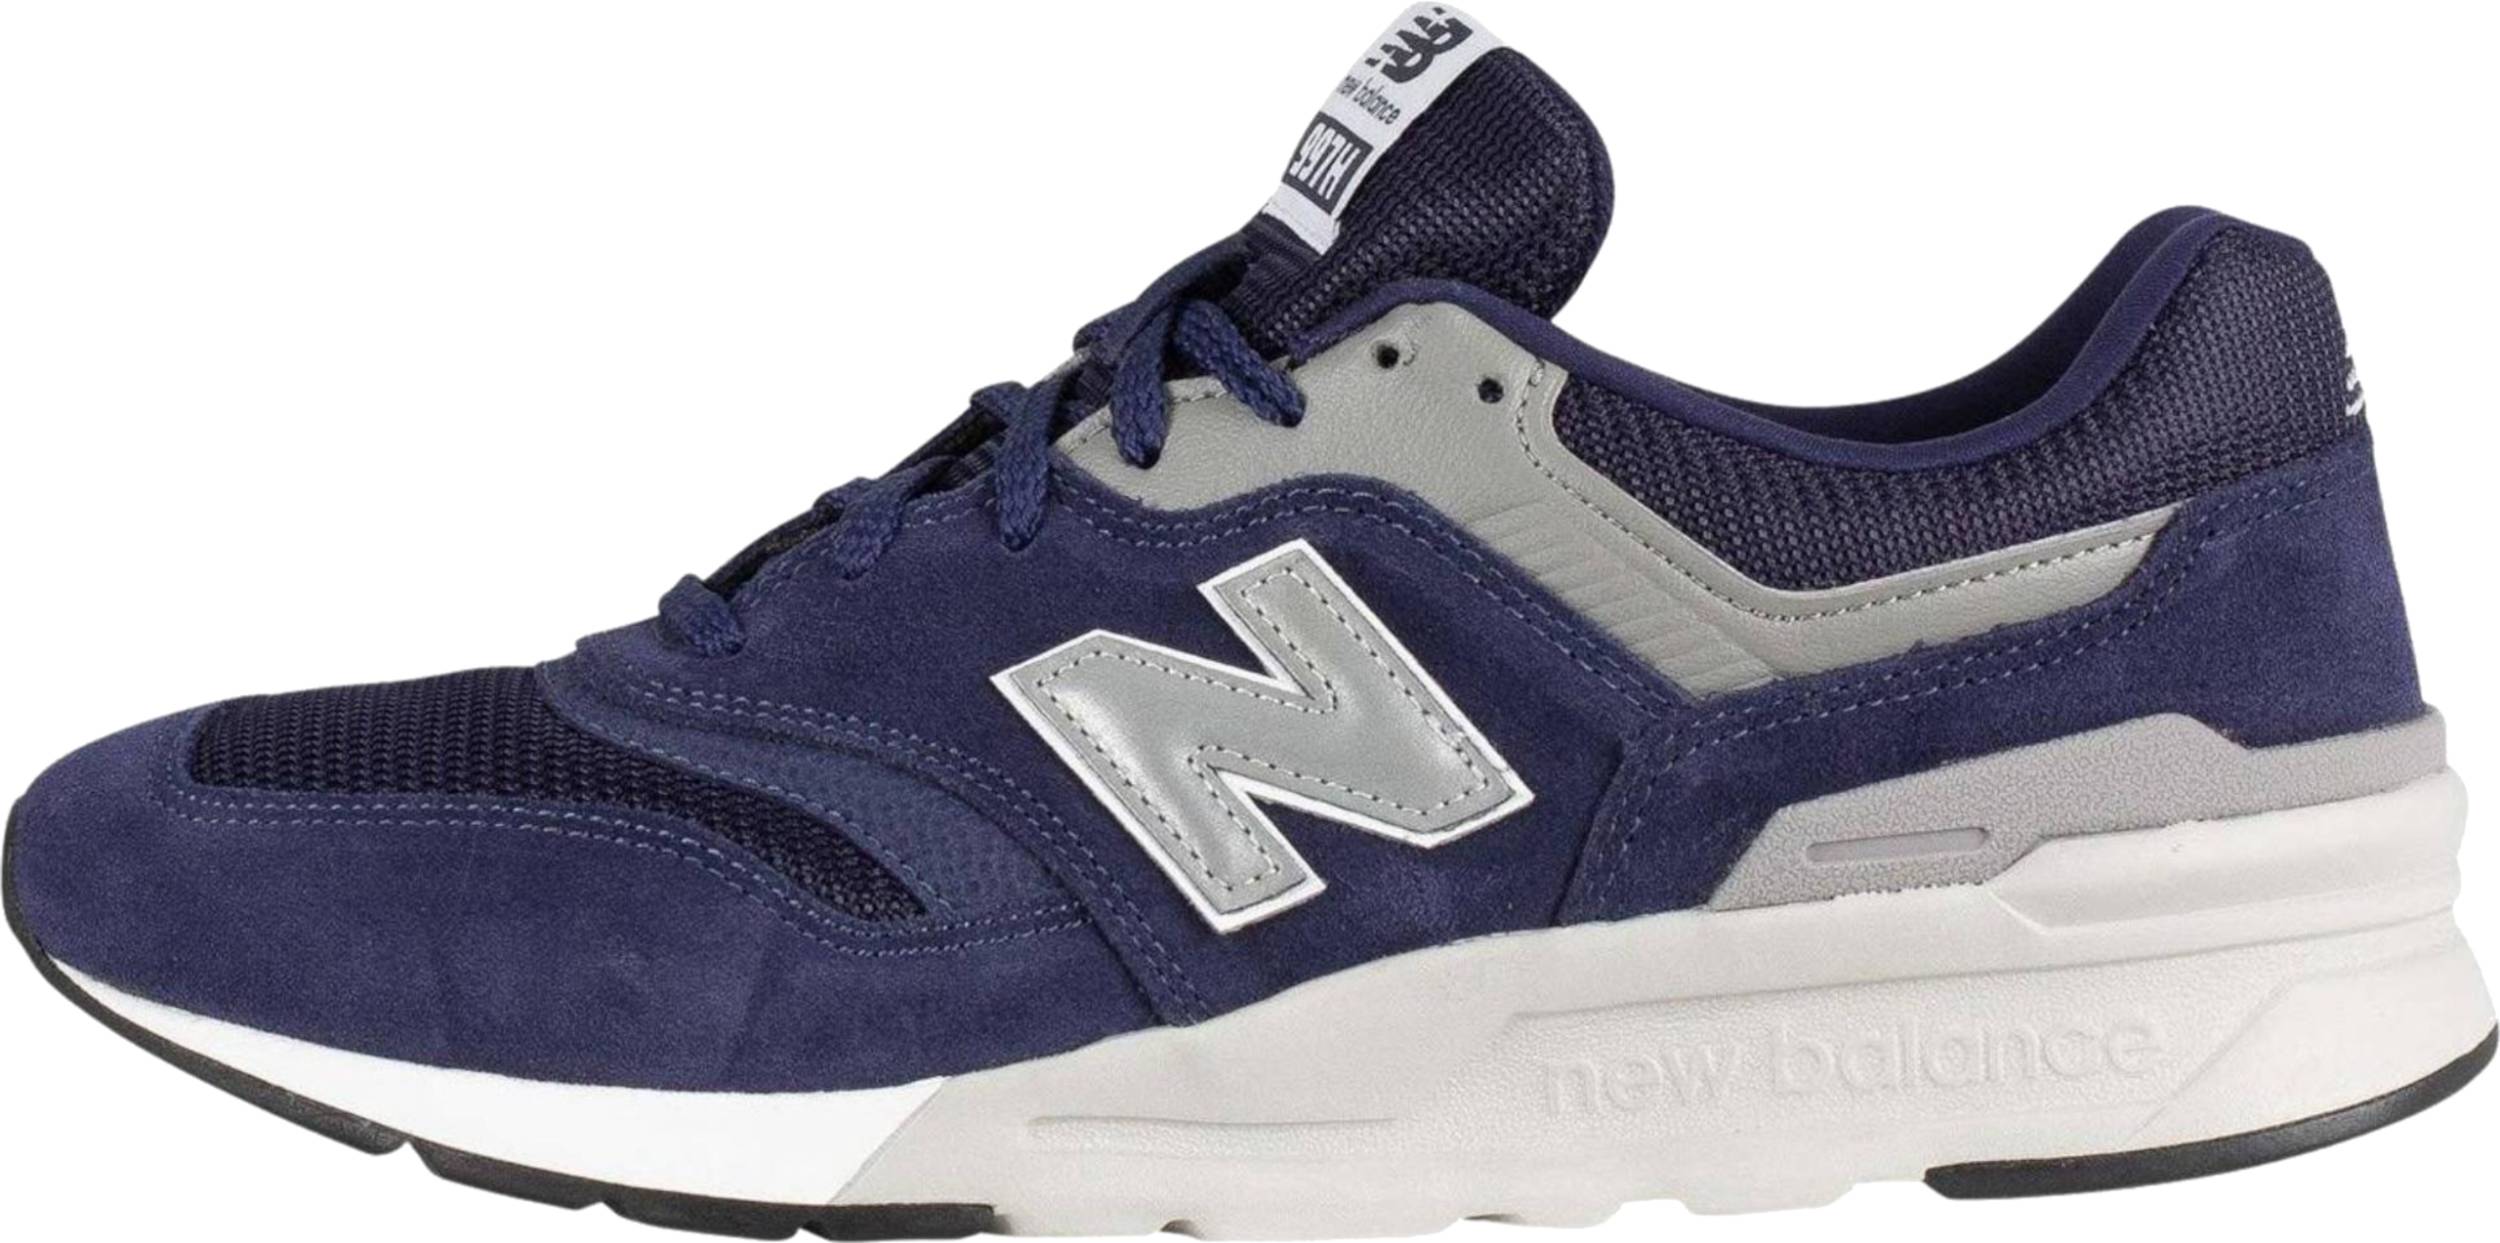 30+ colors of New Balance 997H (from $39) | RunRepeat